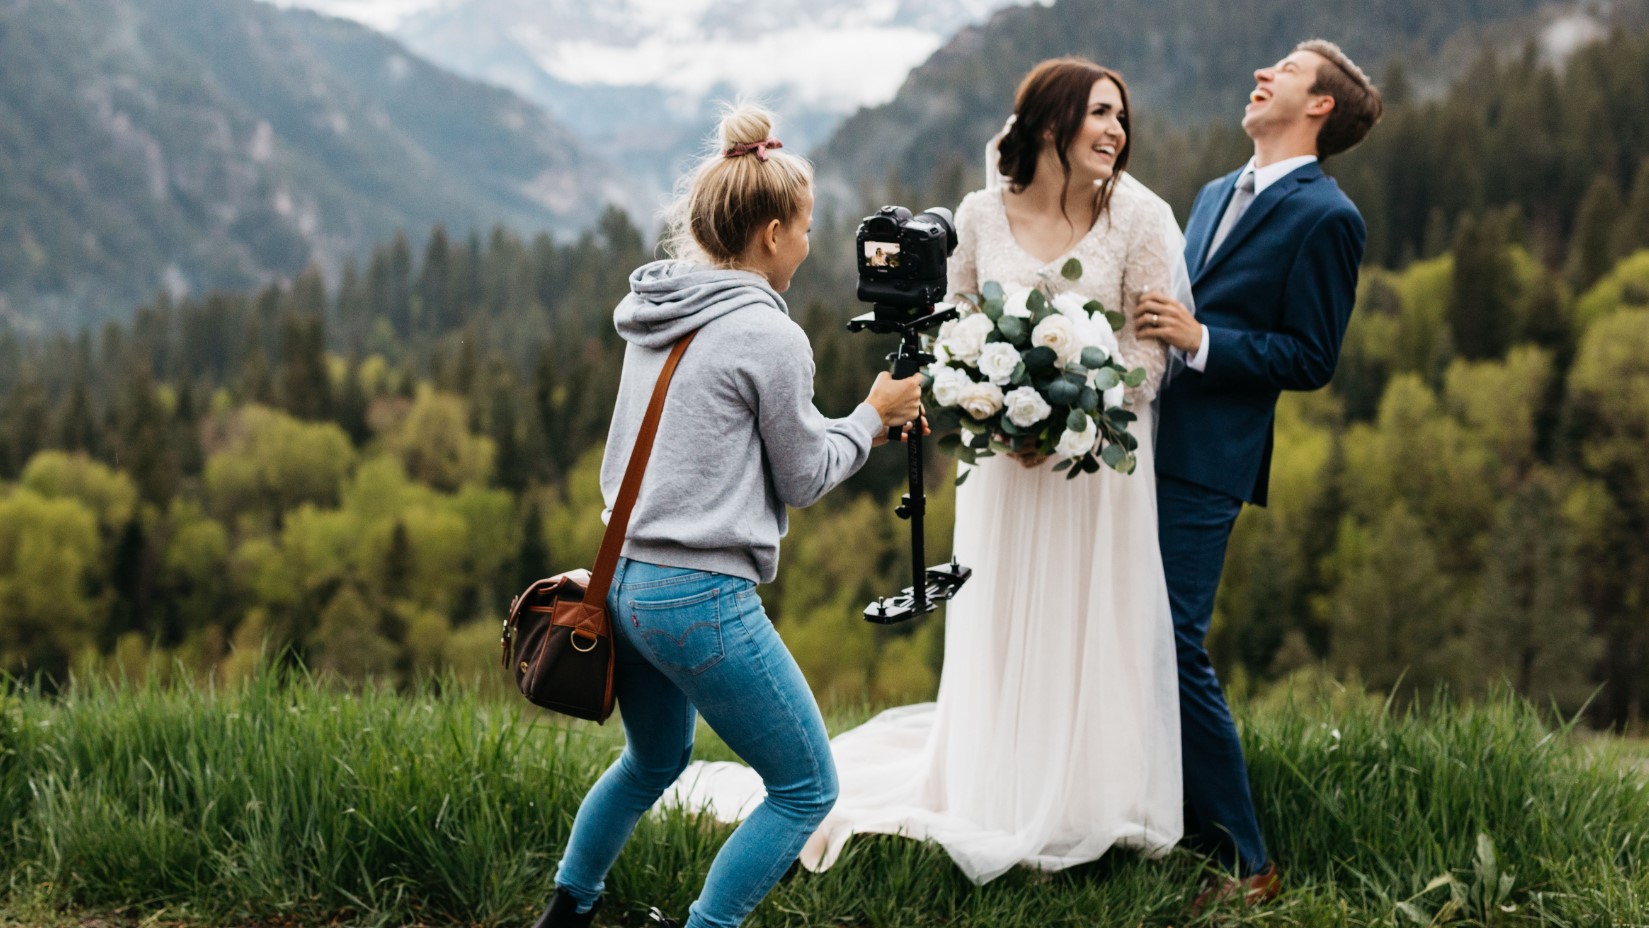 Wedding Videography Trends